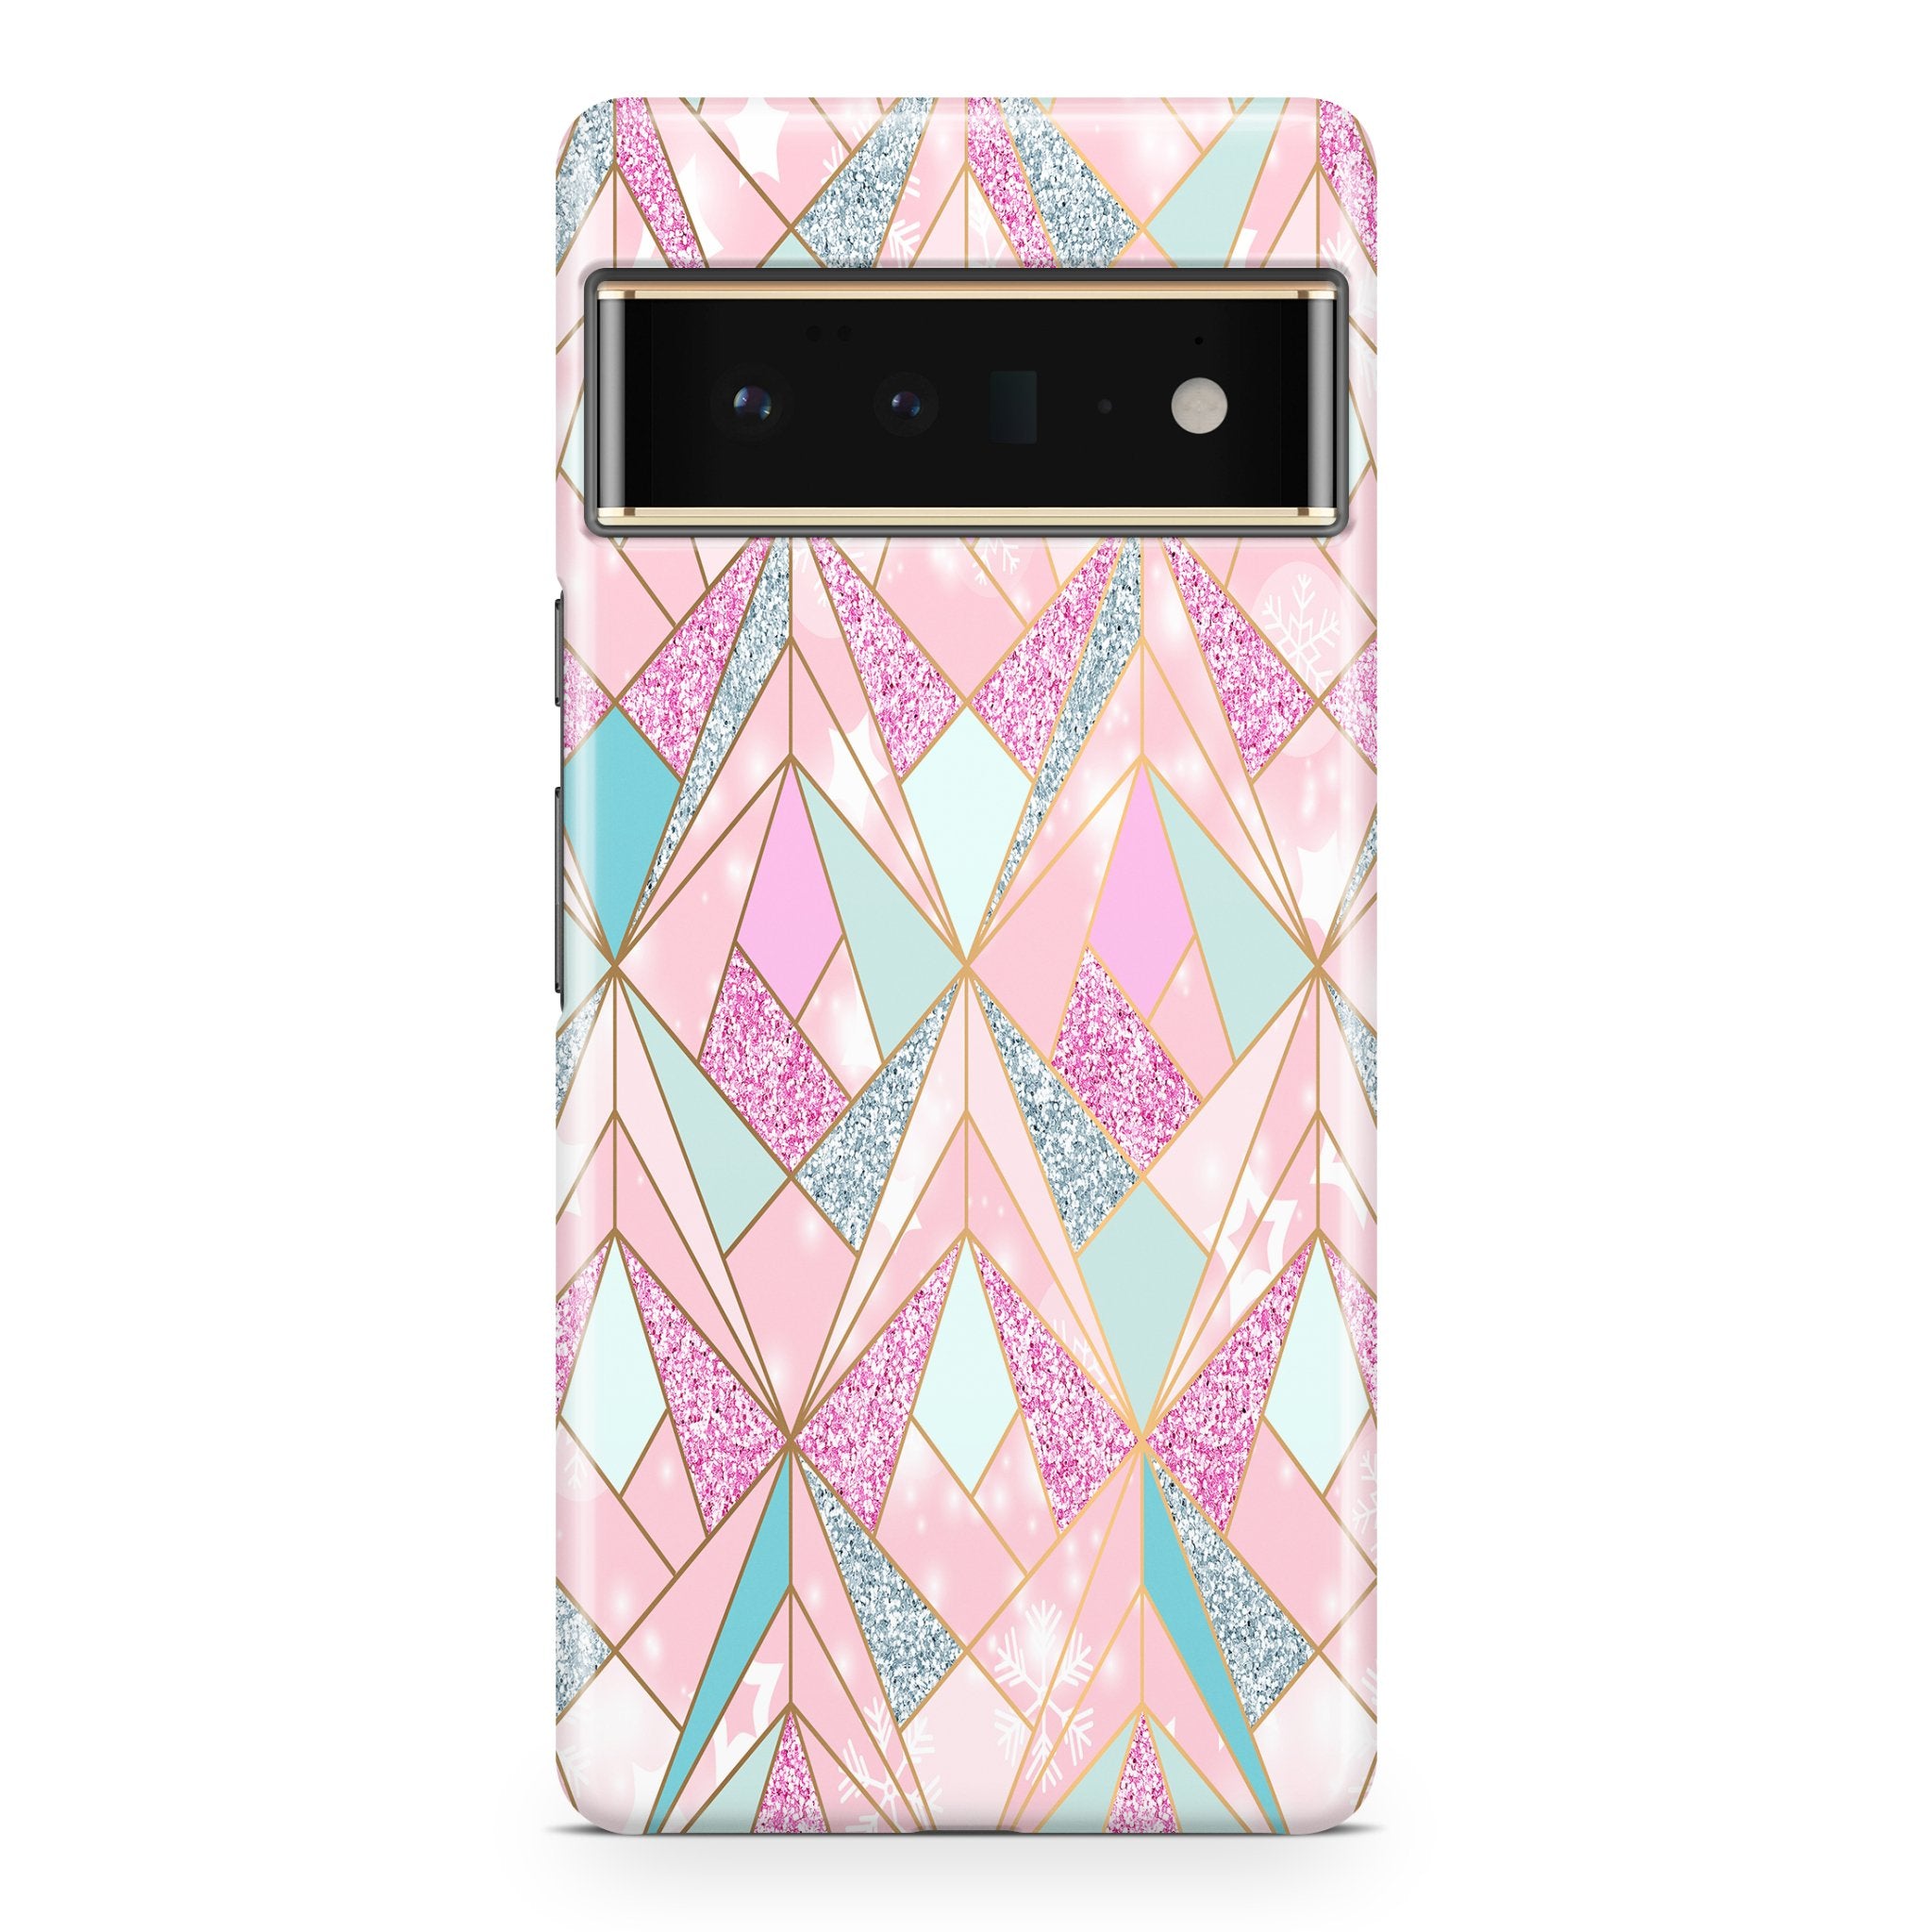 Geometric Winter - Google phone case designs by CaseSwagger